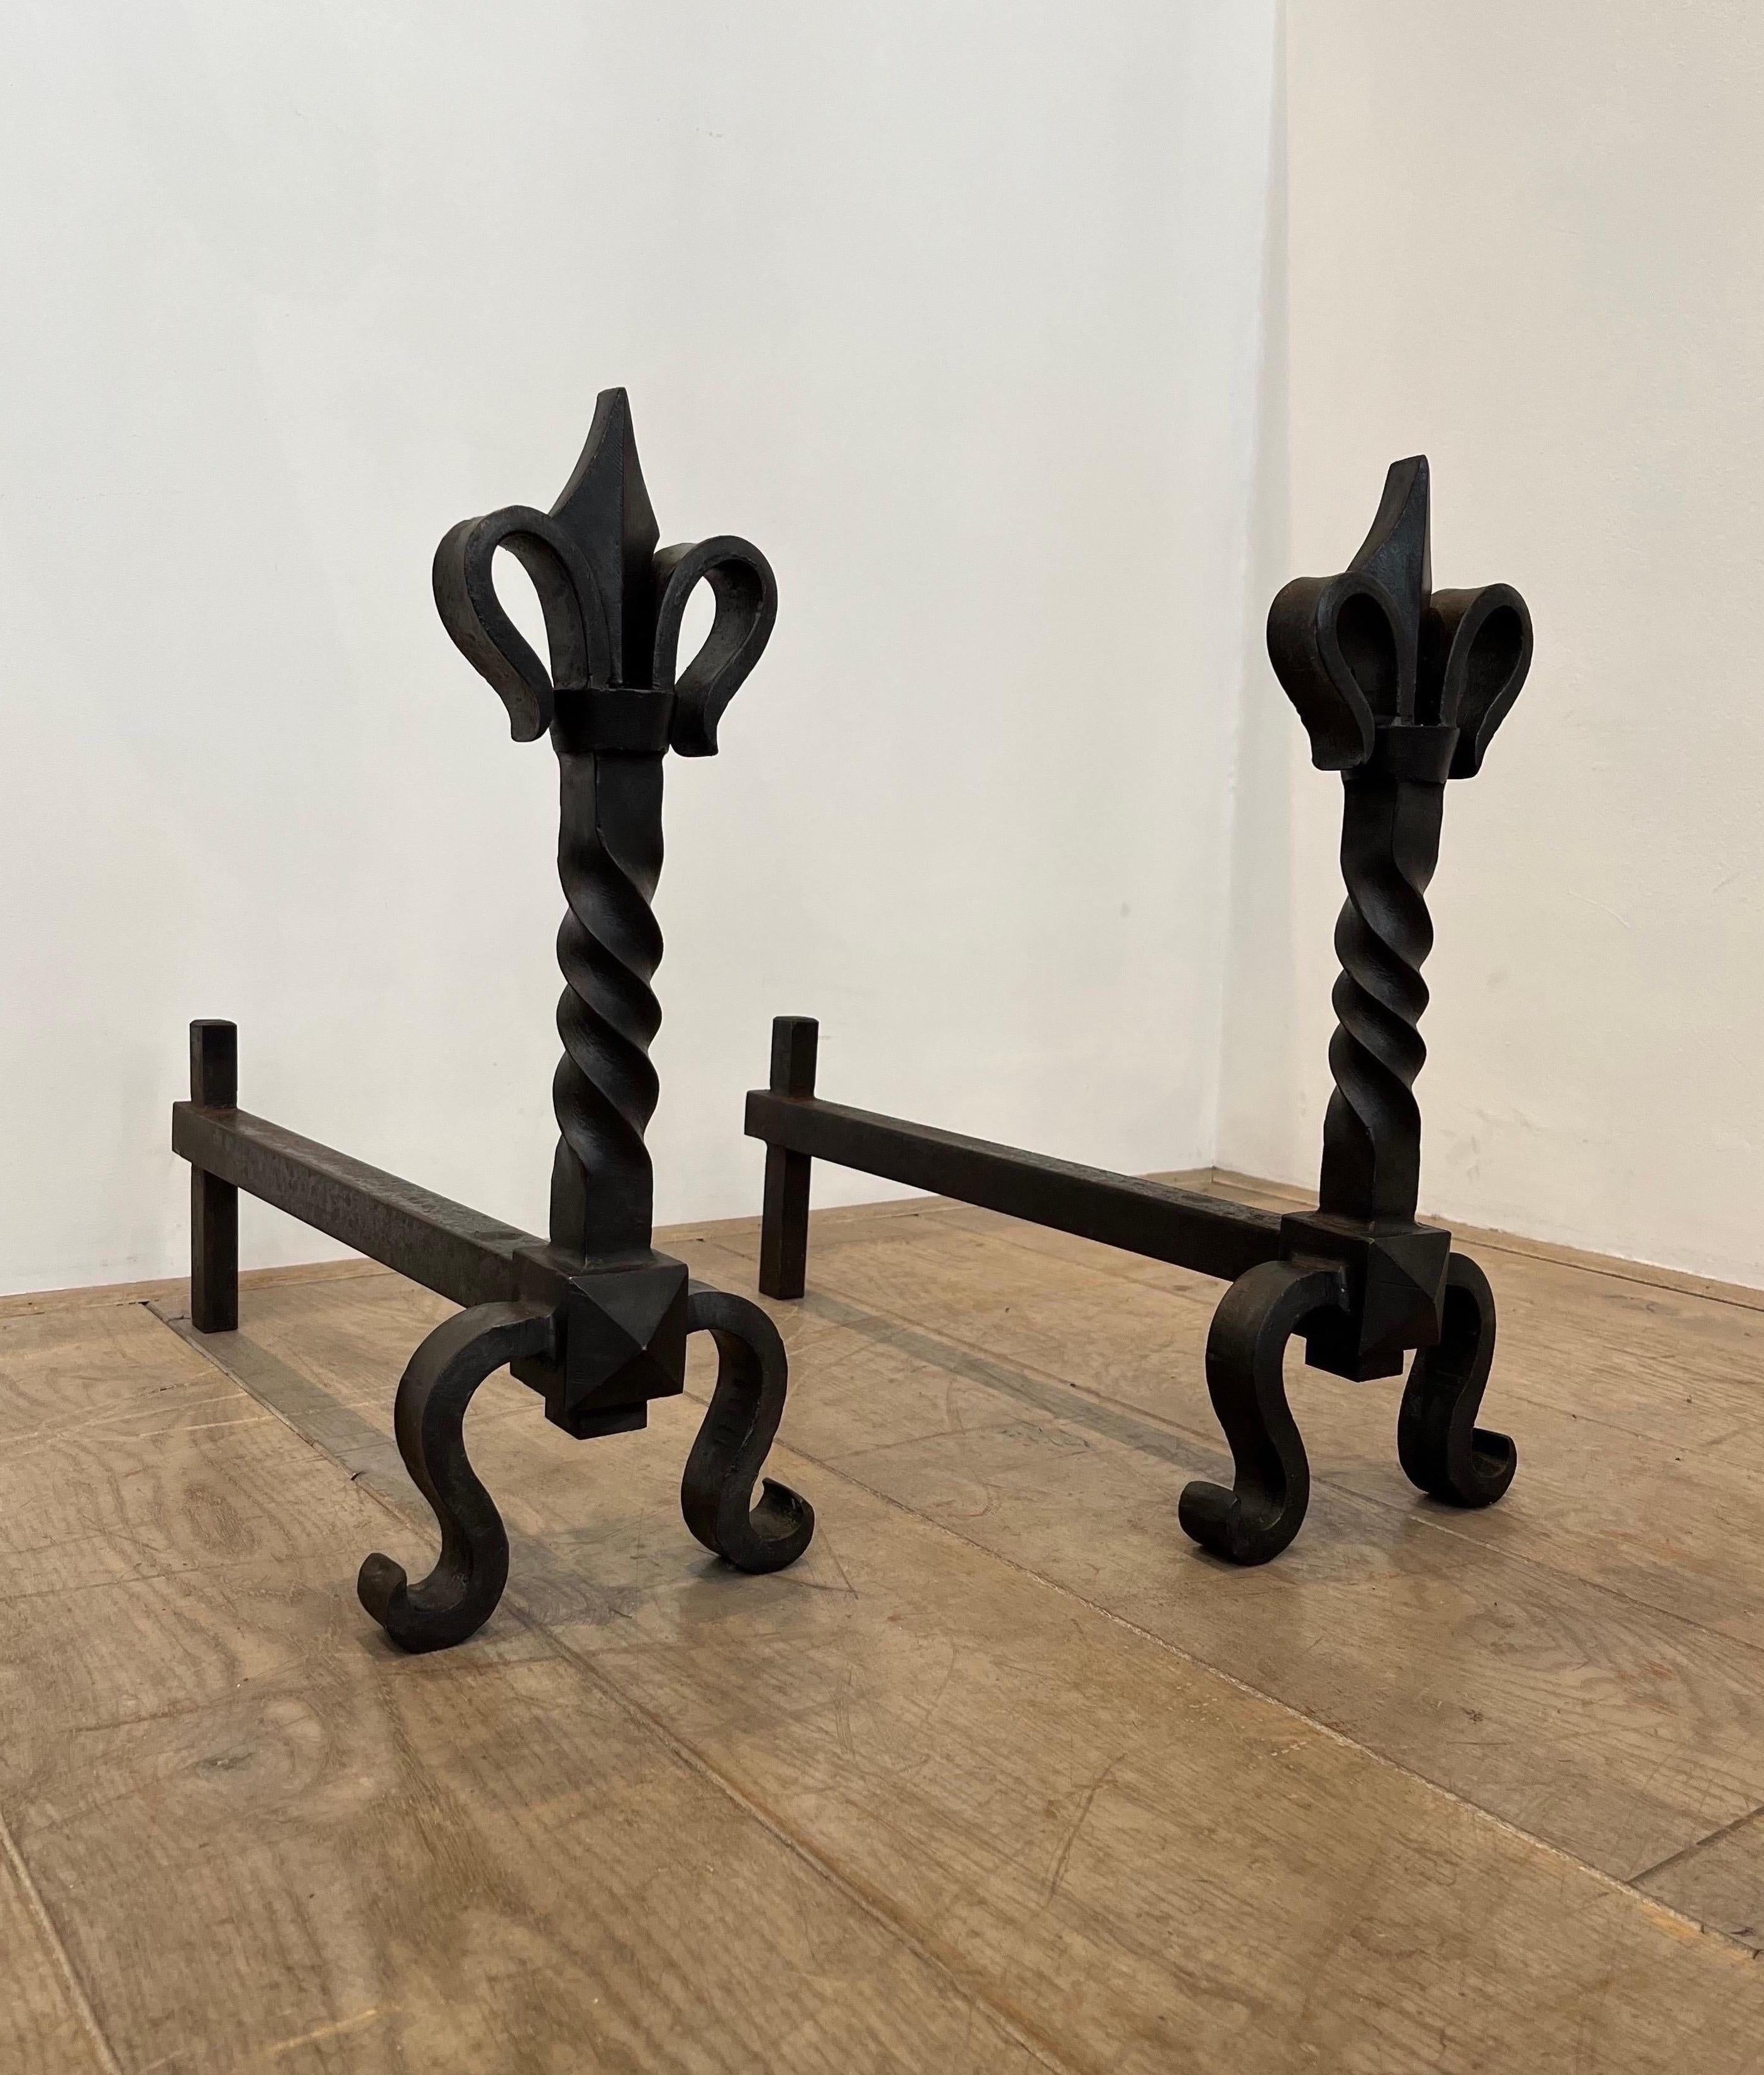 The design is typical of the Decorator Gilbert Poillerat who mastered wrought iron decoration. He was active in the 1940s. They are solid and of great quality.